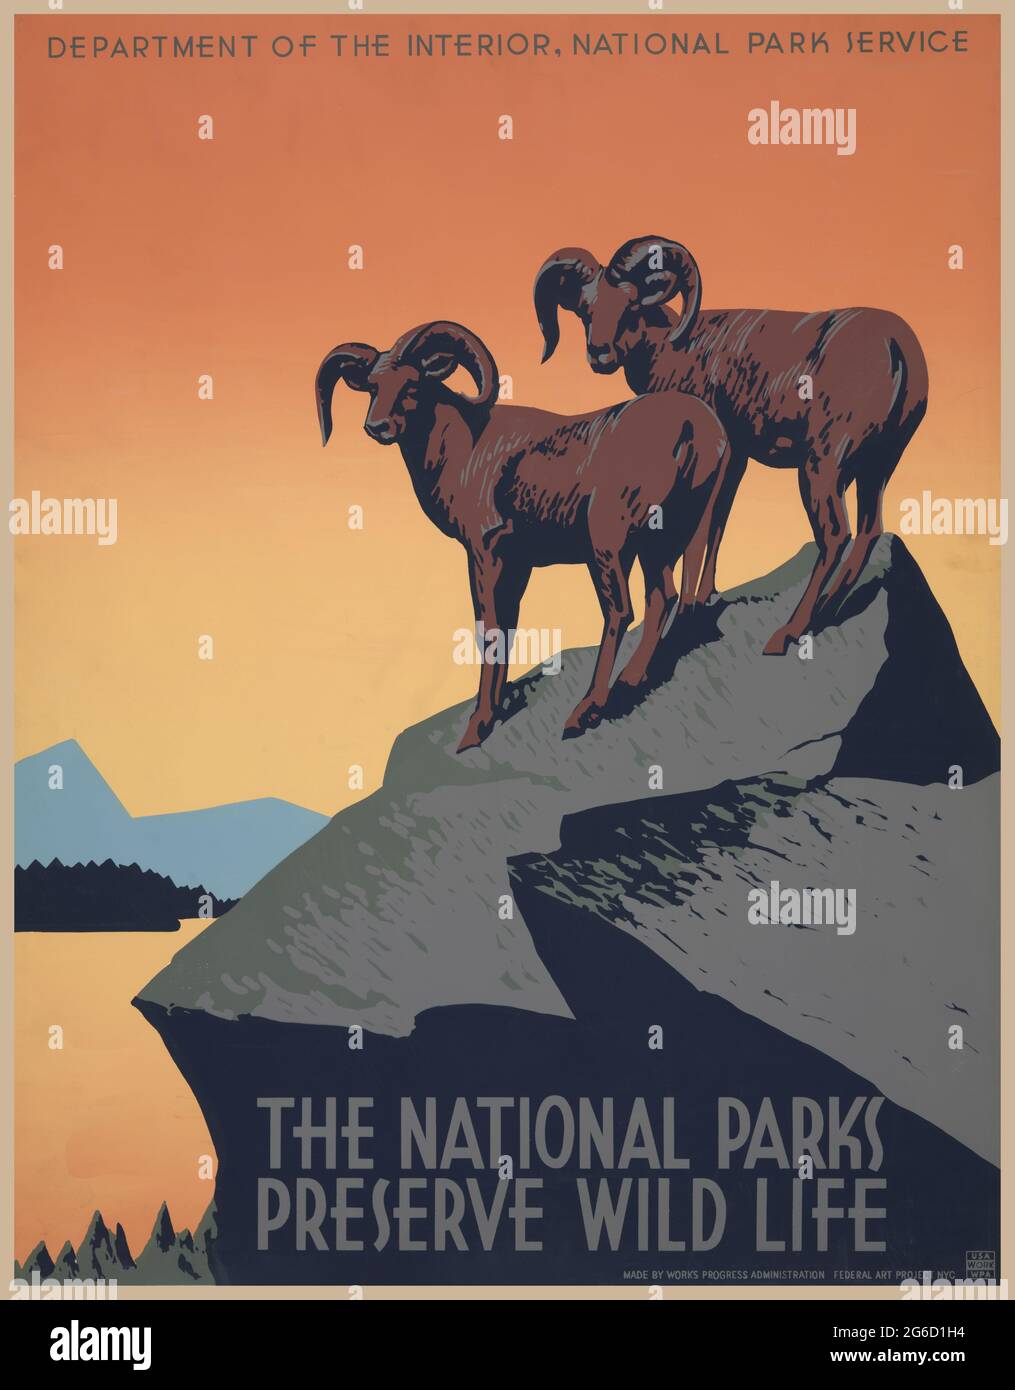 National Park Preserve Wild Life poster 1938. Department of the interior national park service. Travel poster. Tourism. WPA. Poster by J. Hirt. Stock Photo